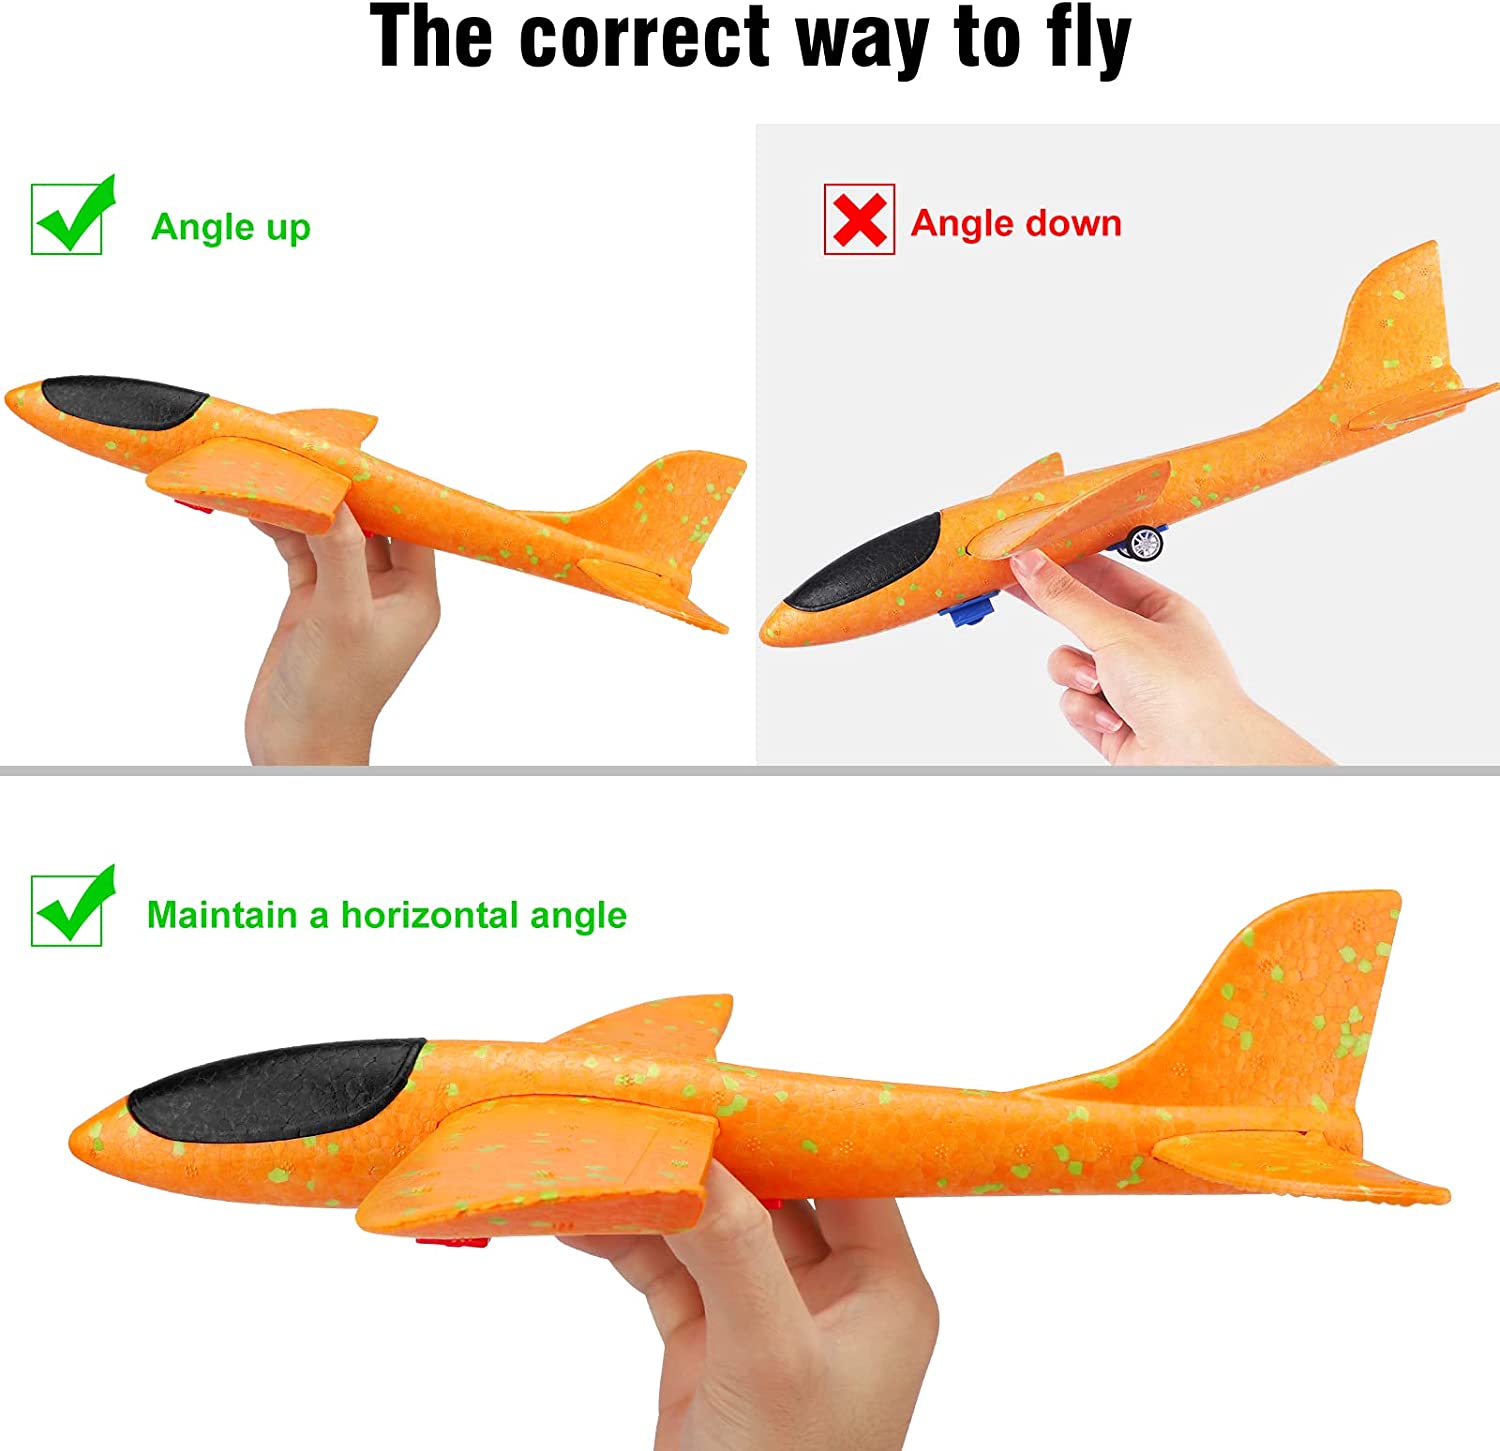 Airplane Launcher Toy, Foam Throwing Glider Plane with Catapult Gun, Indoor Outdoor Shooting Game for Kids Boys Girls Age 3-12,Flying Gadget Children Xmas Birthday Gift & Present Stocking Filler - FoxMart™️ - 36 months - 10 years